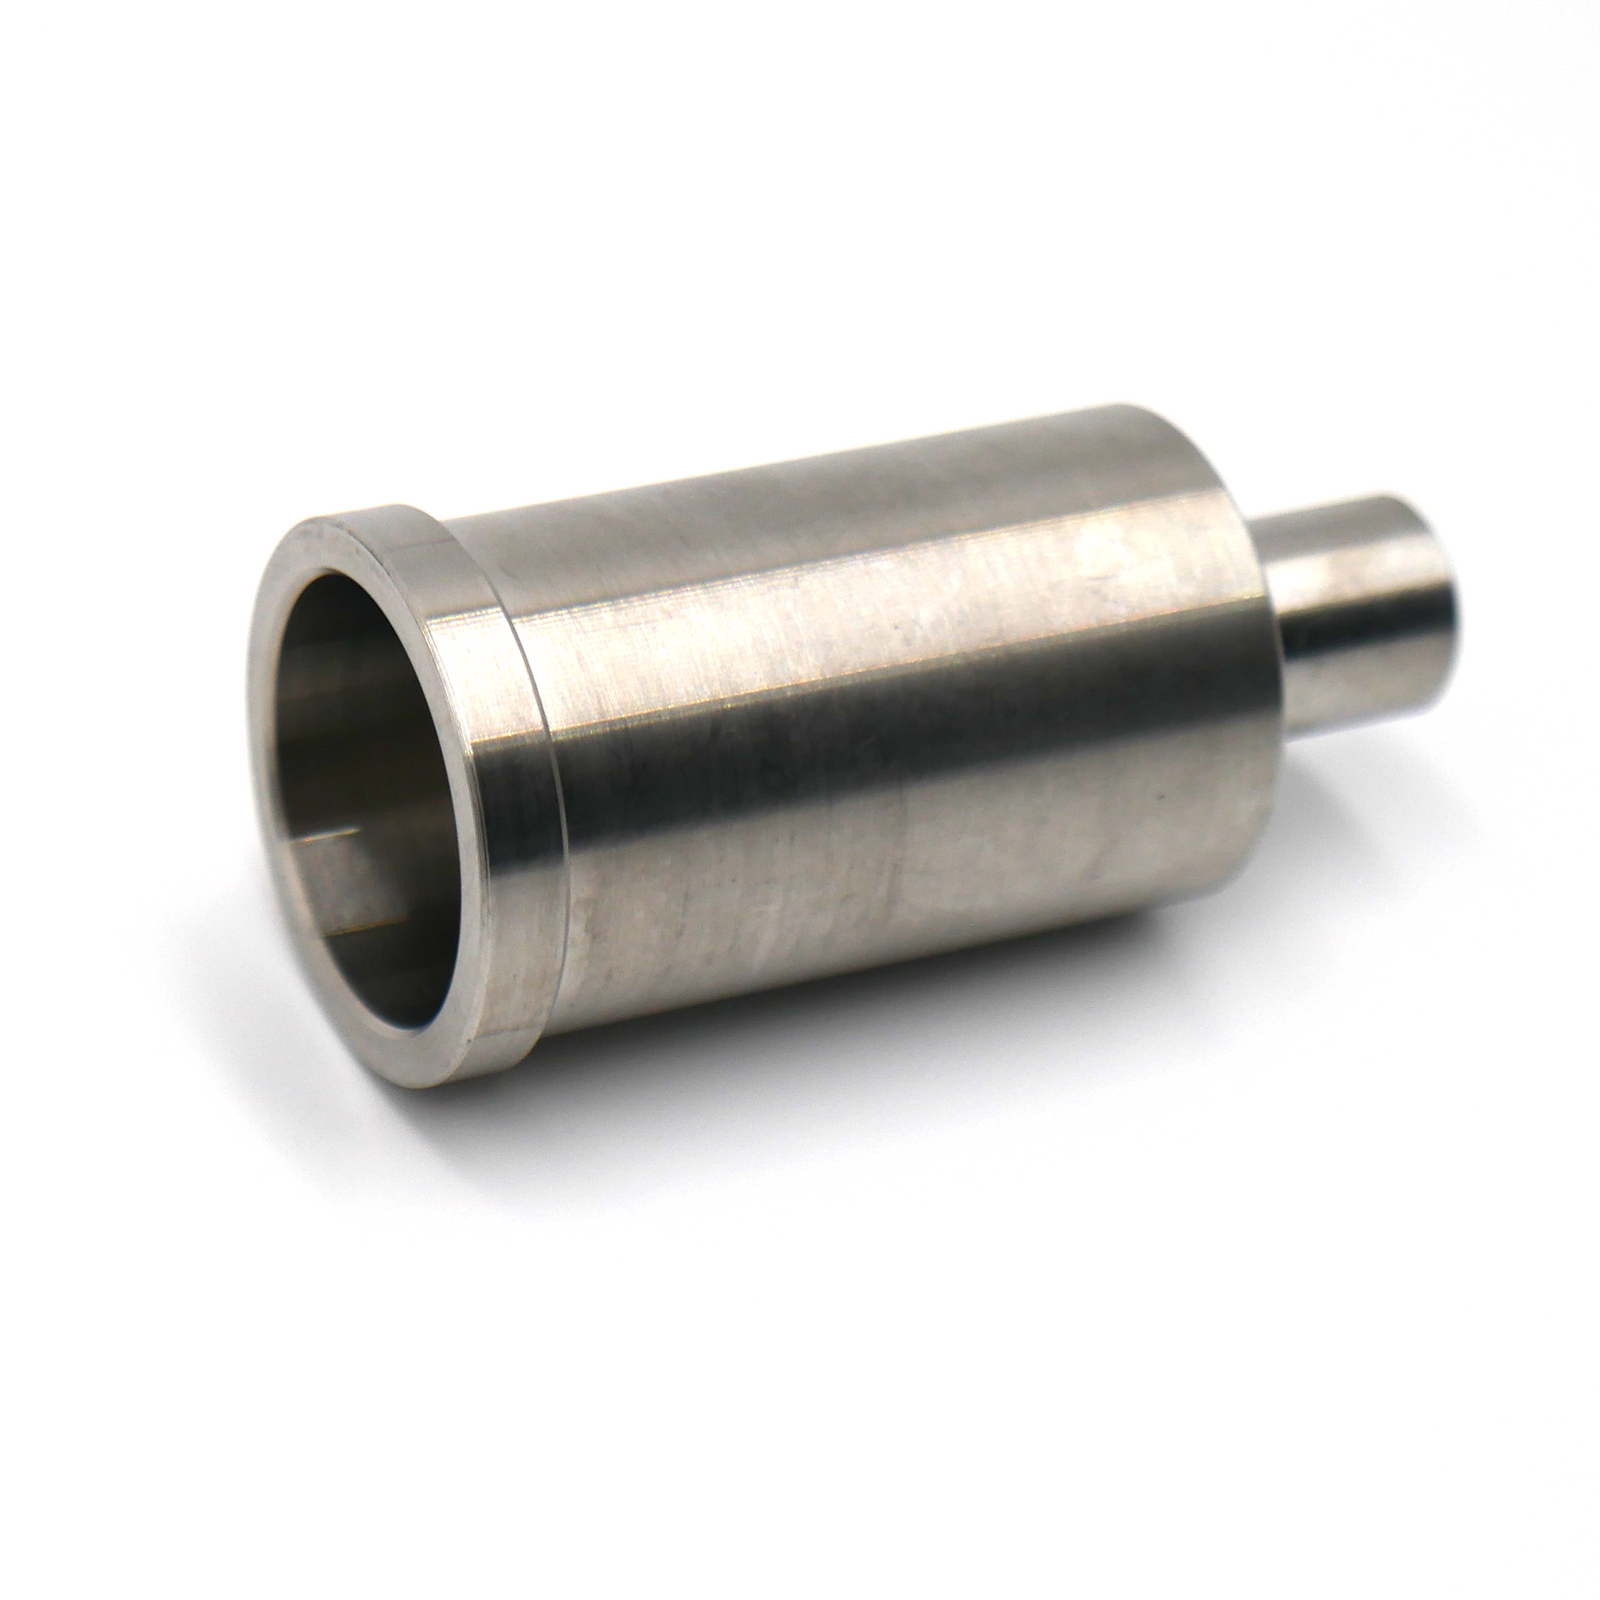 Type A 10mm Dispensing Nozzle Filling Tip